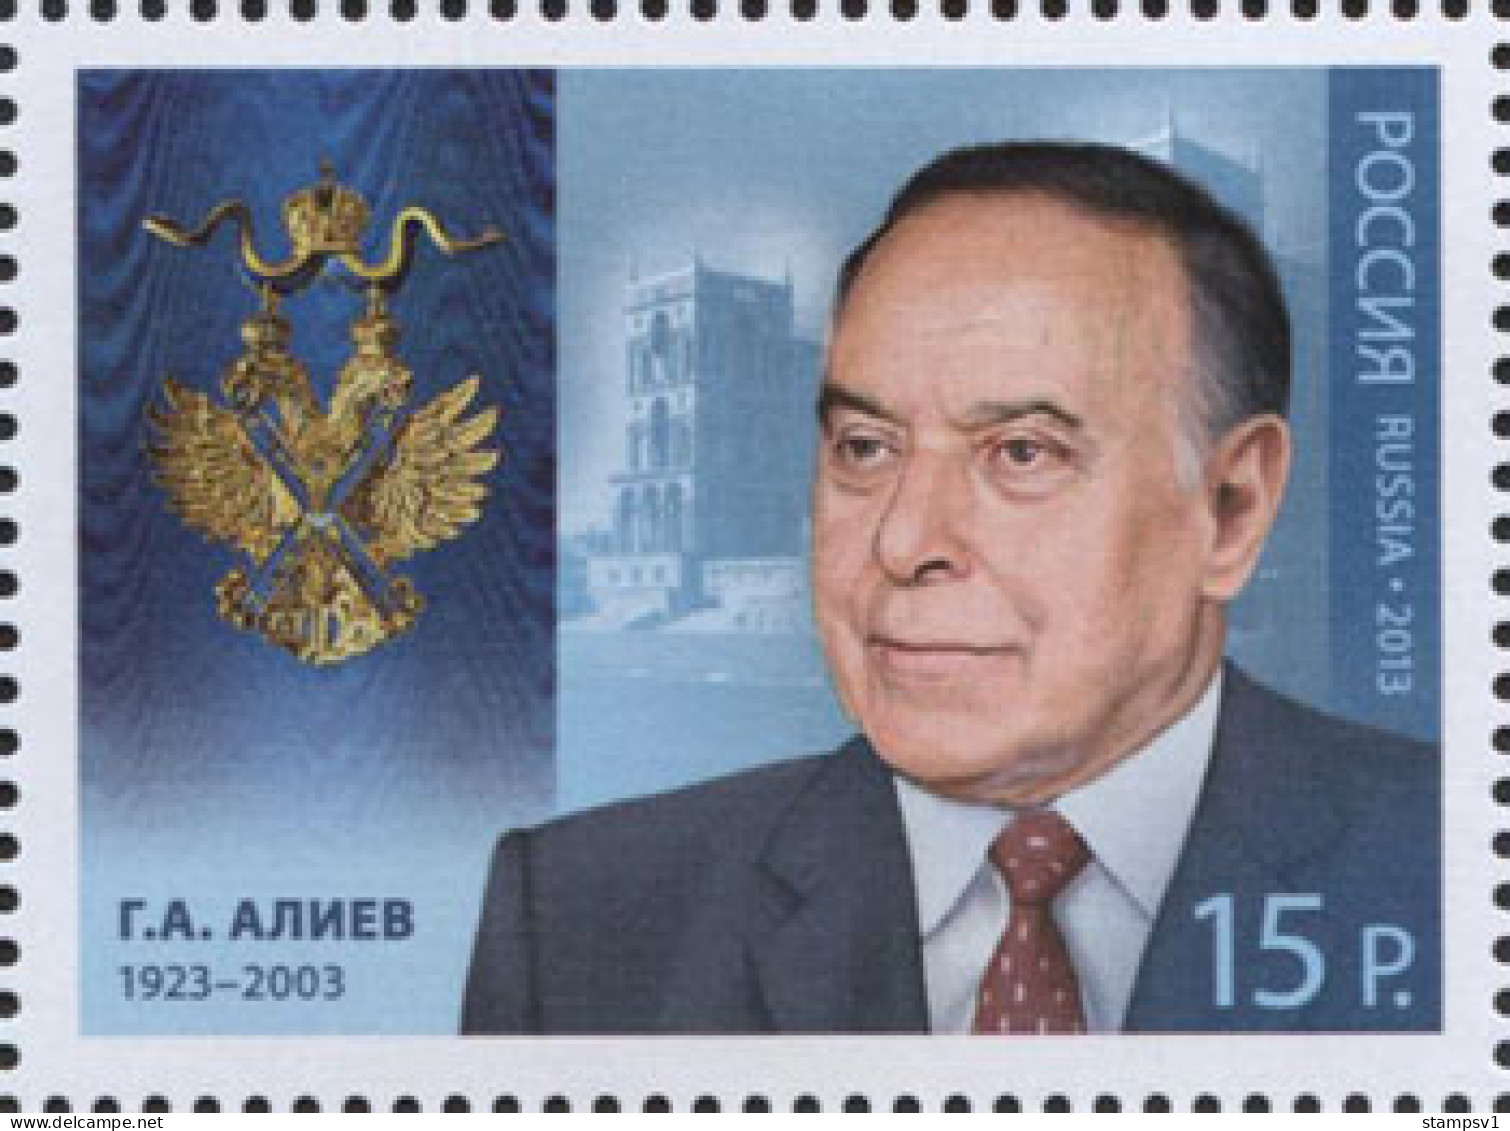 Russia 2013  Heydar Aliyev - Holder Of An Order Of St. Andrew The Apostle The First-Called. Mi 1926 - Neufs